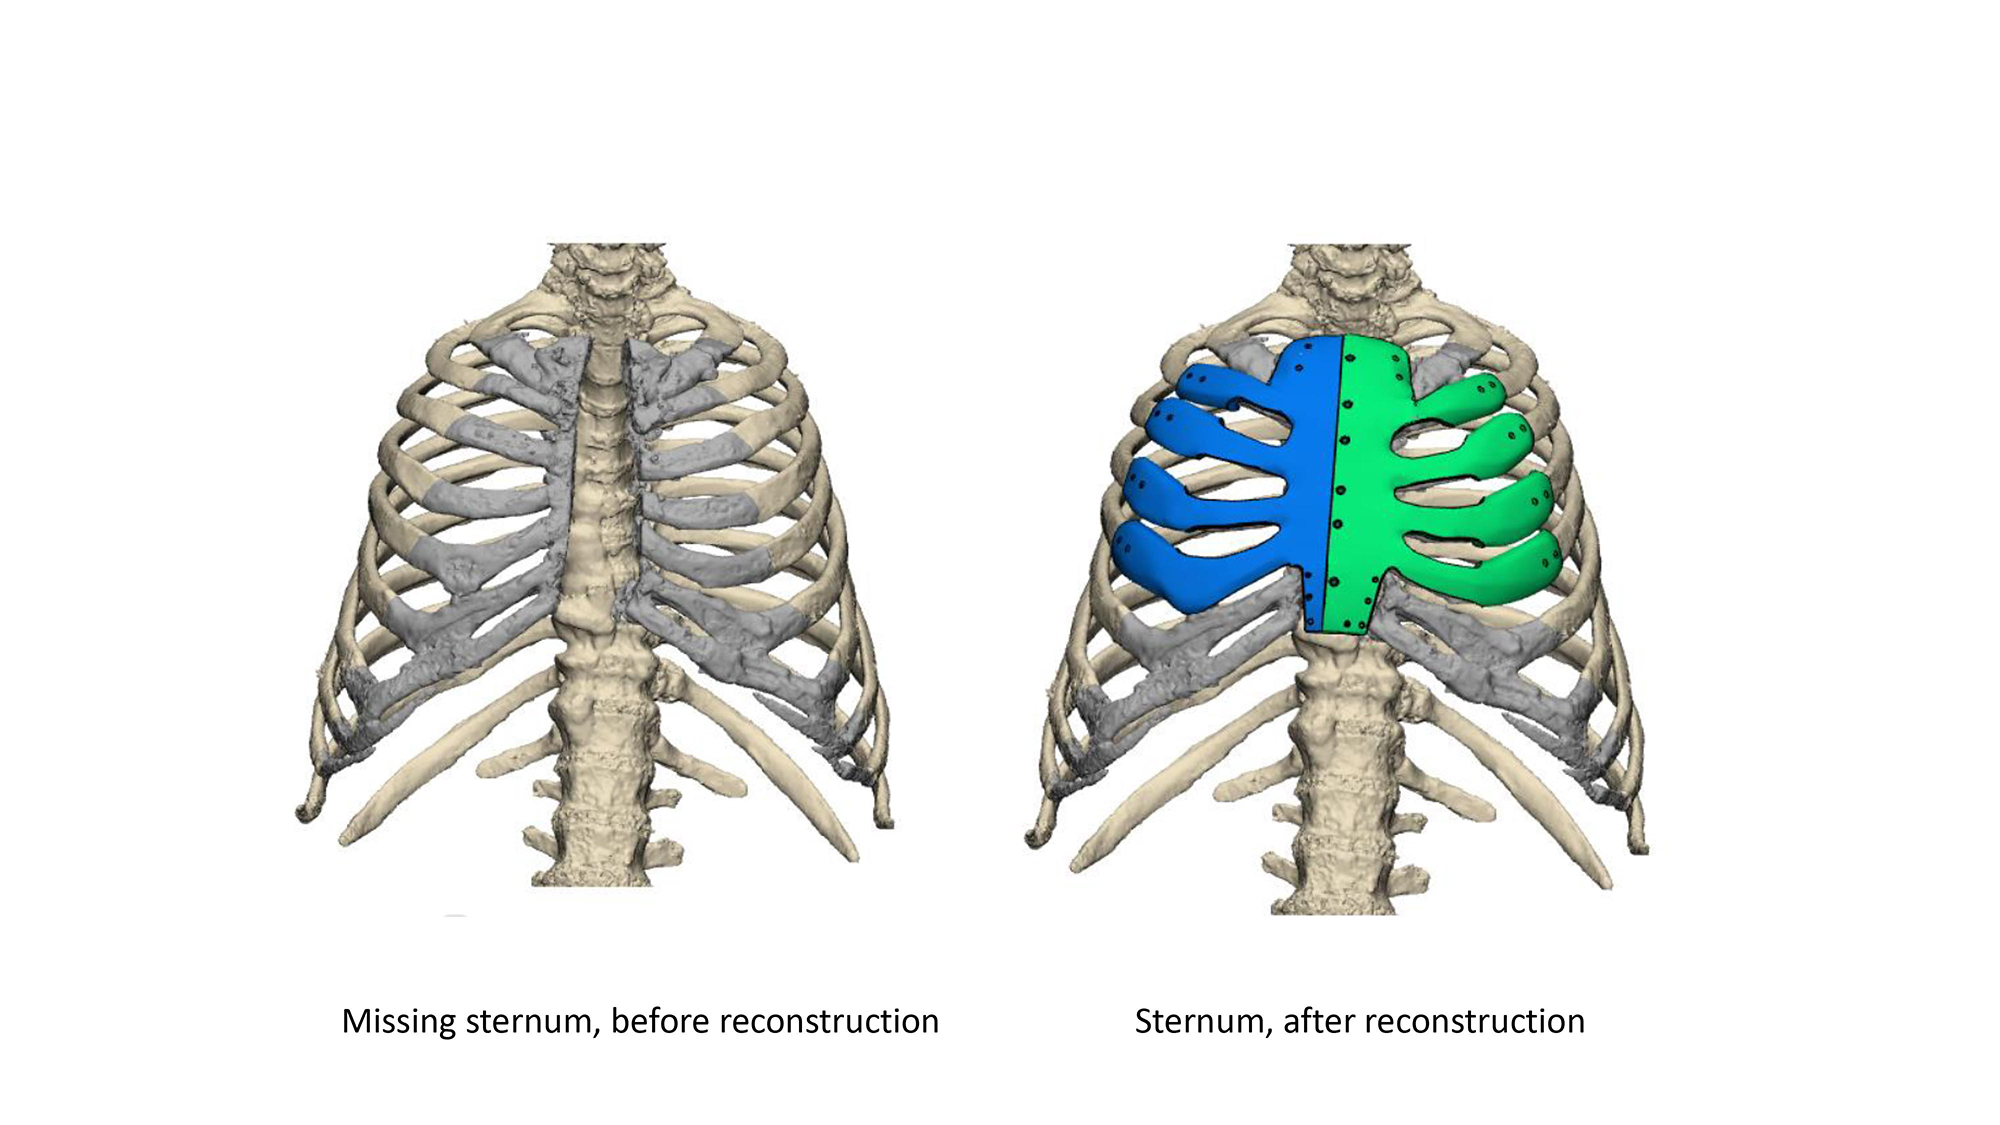 These Mayo Clinic images show how a missing sternum can be reconstructed using a replacement part that has been 3D printed.